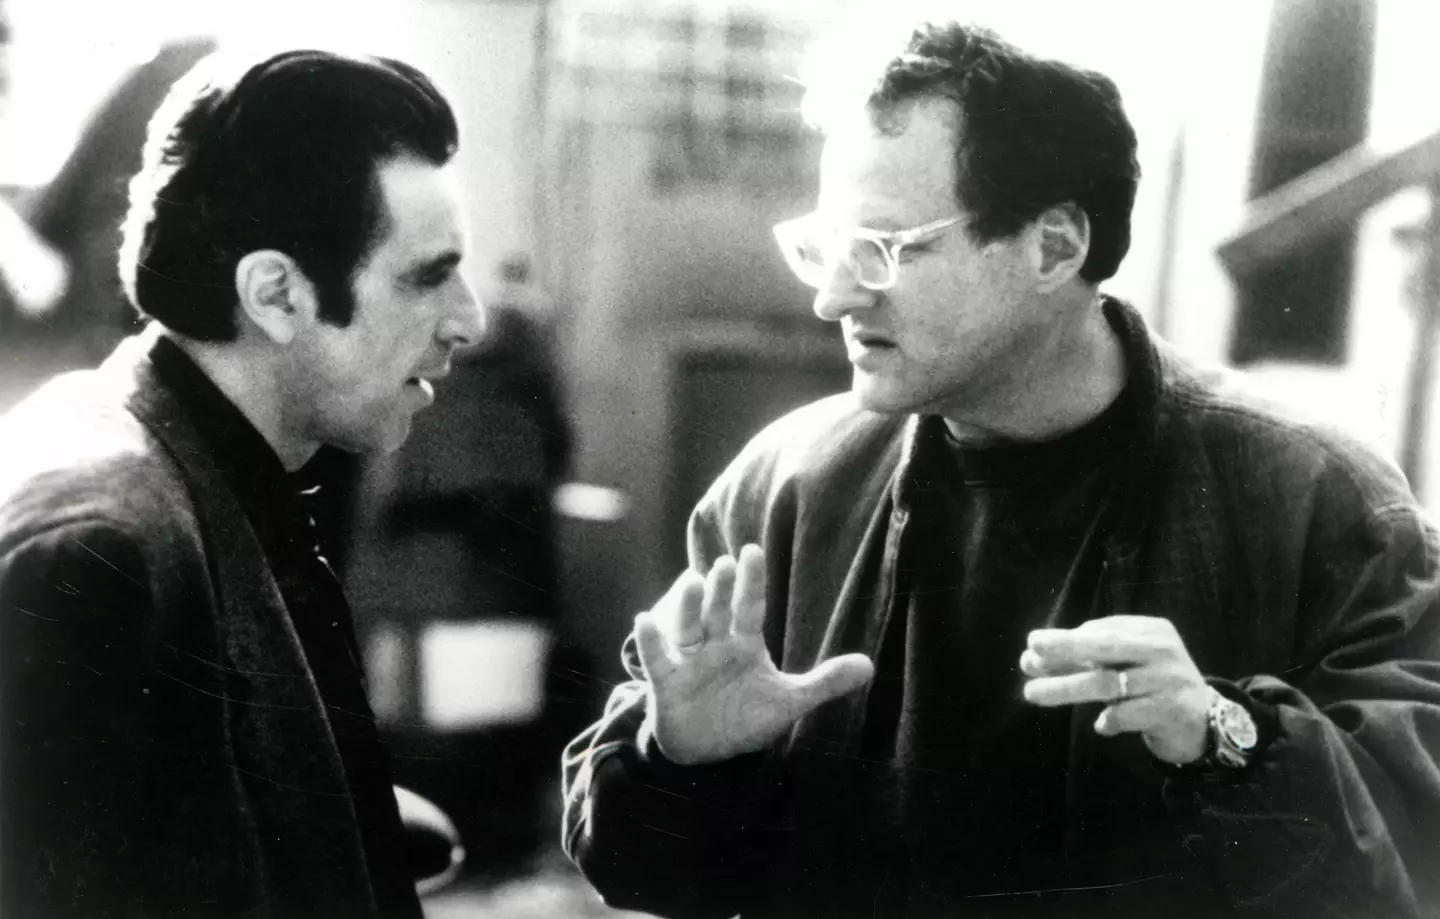 Actor Al Pacino and director Michael Mann on the set of Heat.